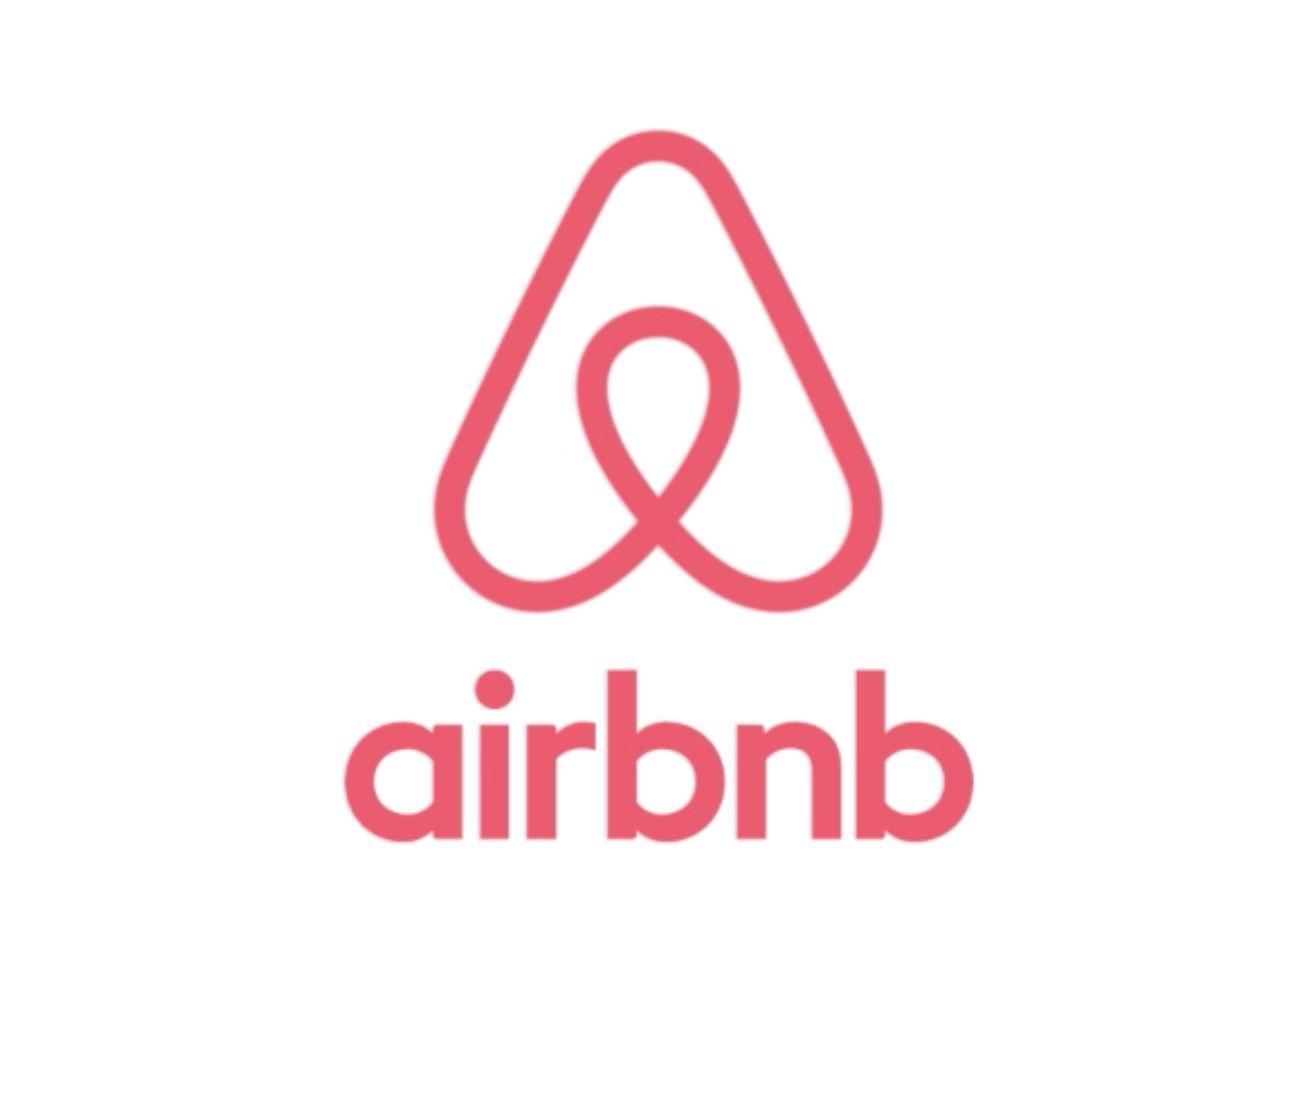 Airbnb New Logo - AirBnB is now a lifestyle brand